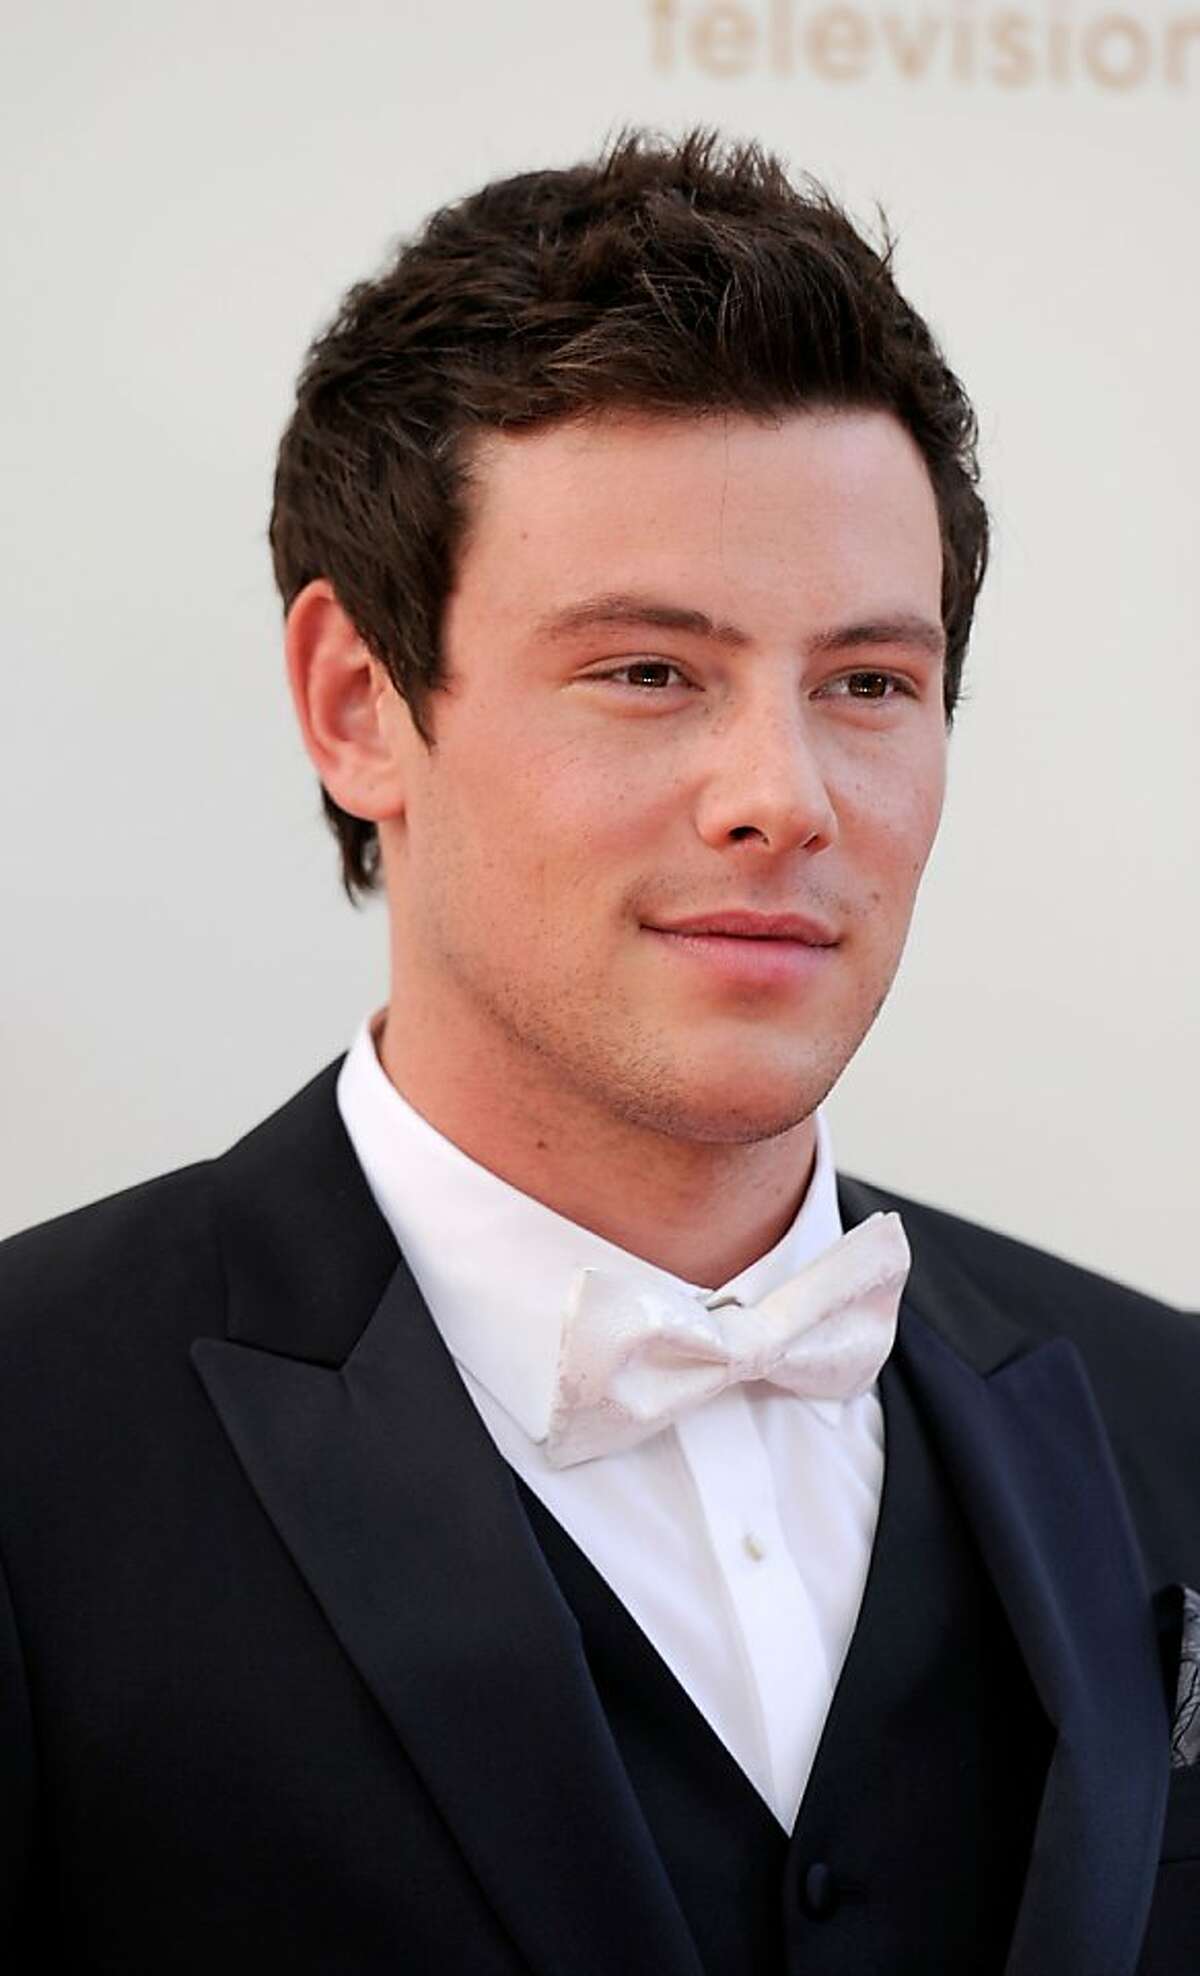 LOS ANGELES, CA - SEPTEMBER 18: Actor Cory Monteith arrives at the 63rd Annual Primetime Emmy Awards held at Nokia Theatre L.A. LIVE on September 18, 2011 in Los Angeles, California. (Photo by Frazer Harrison/Getty Images)